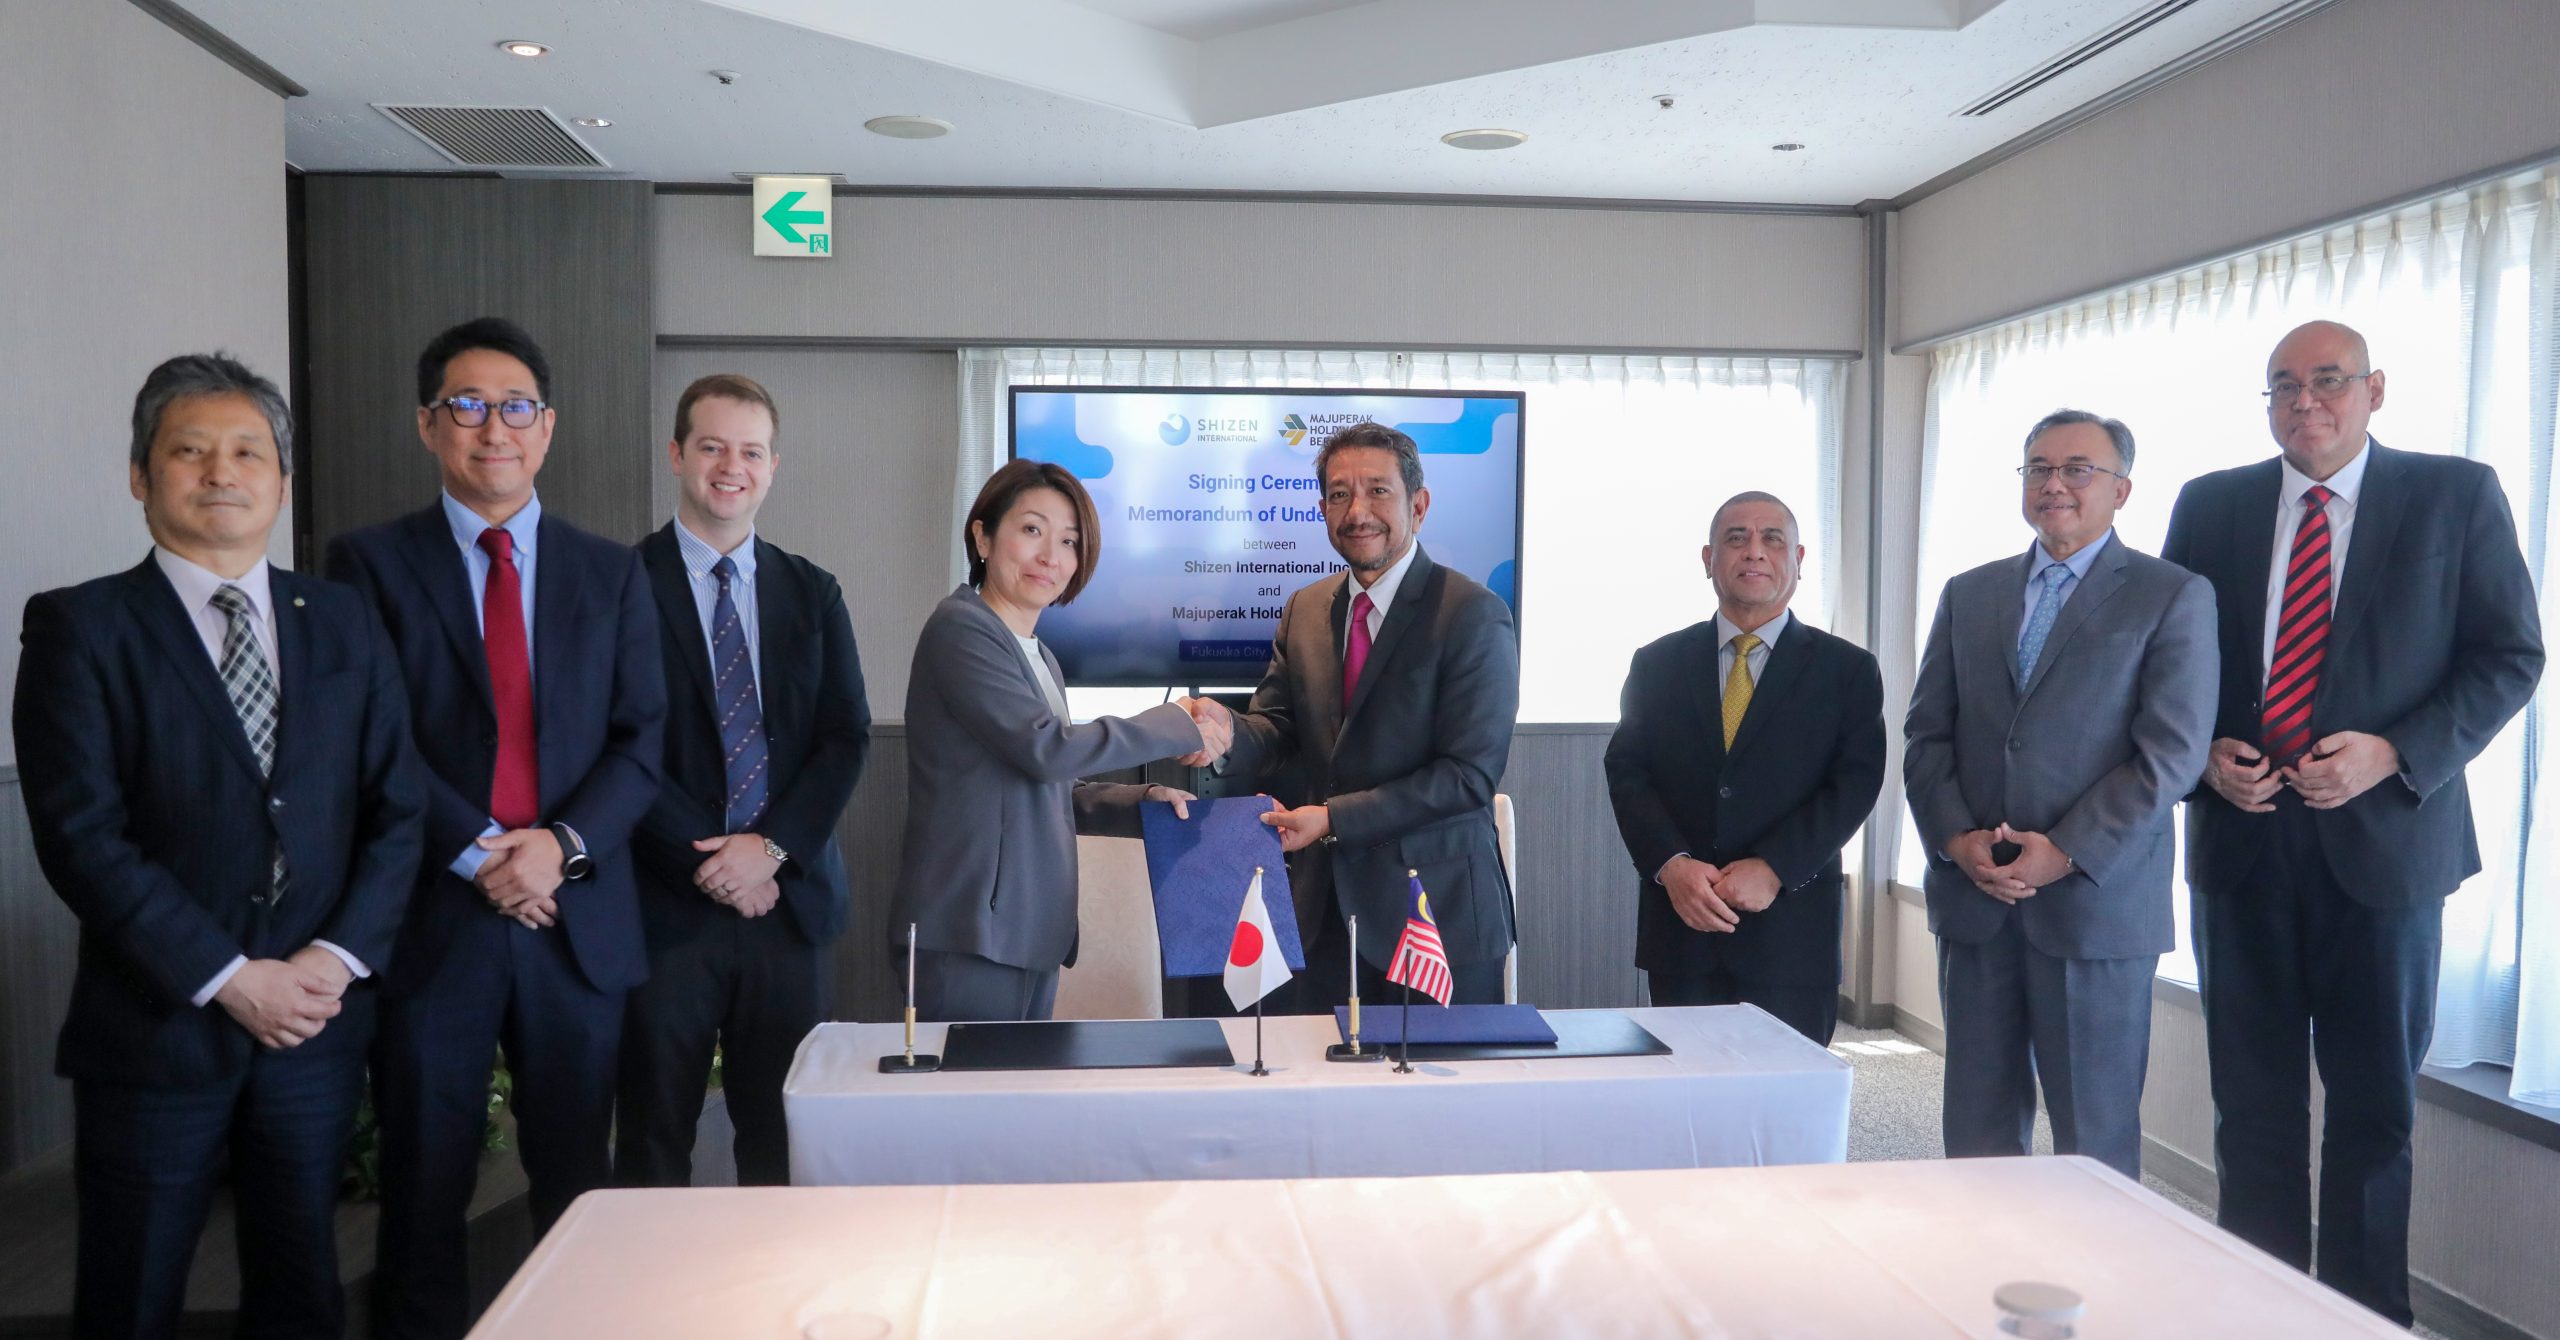 Shizen International, a subsidiary of the Shizen Energy Group, has inked a memorandum of understanding (MoU) with Majuperak Holdings Berhad (MHB), a state government-linked company (GLC) to evaluate bodies of water suitable for floating solar projects in Perak, Malaysia.